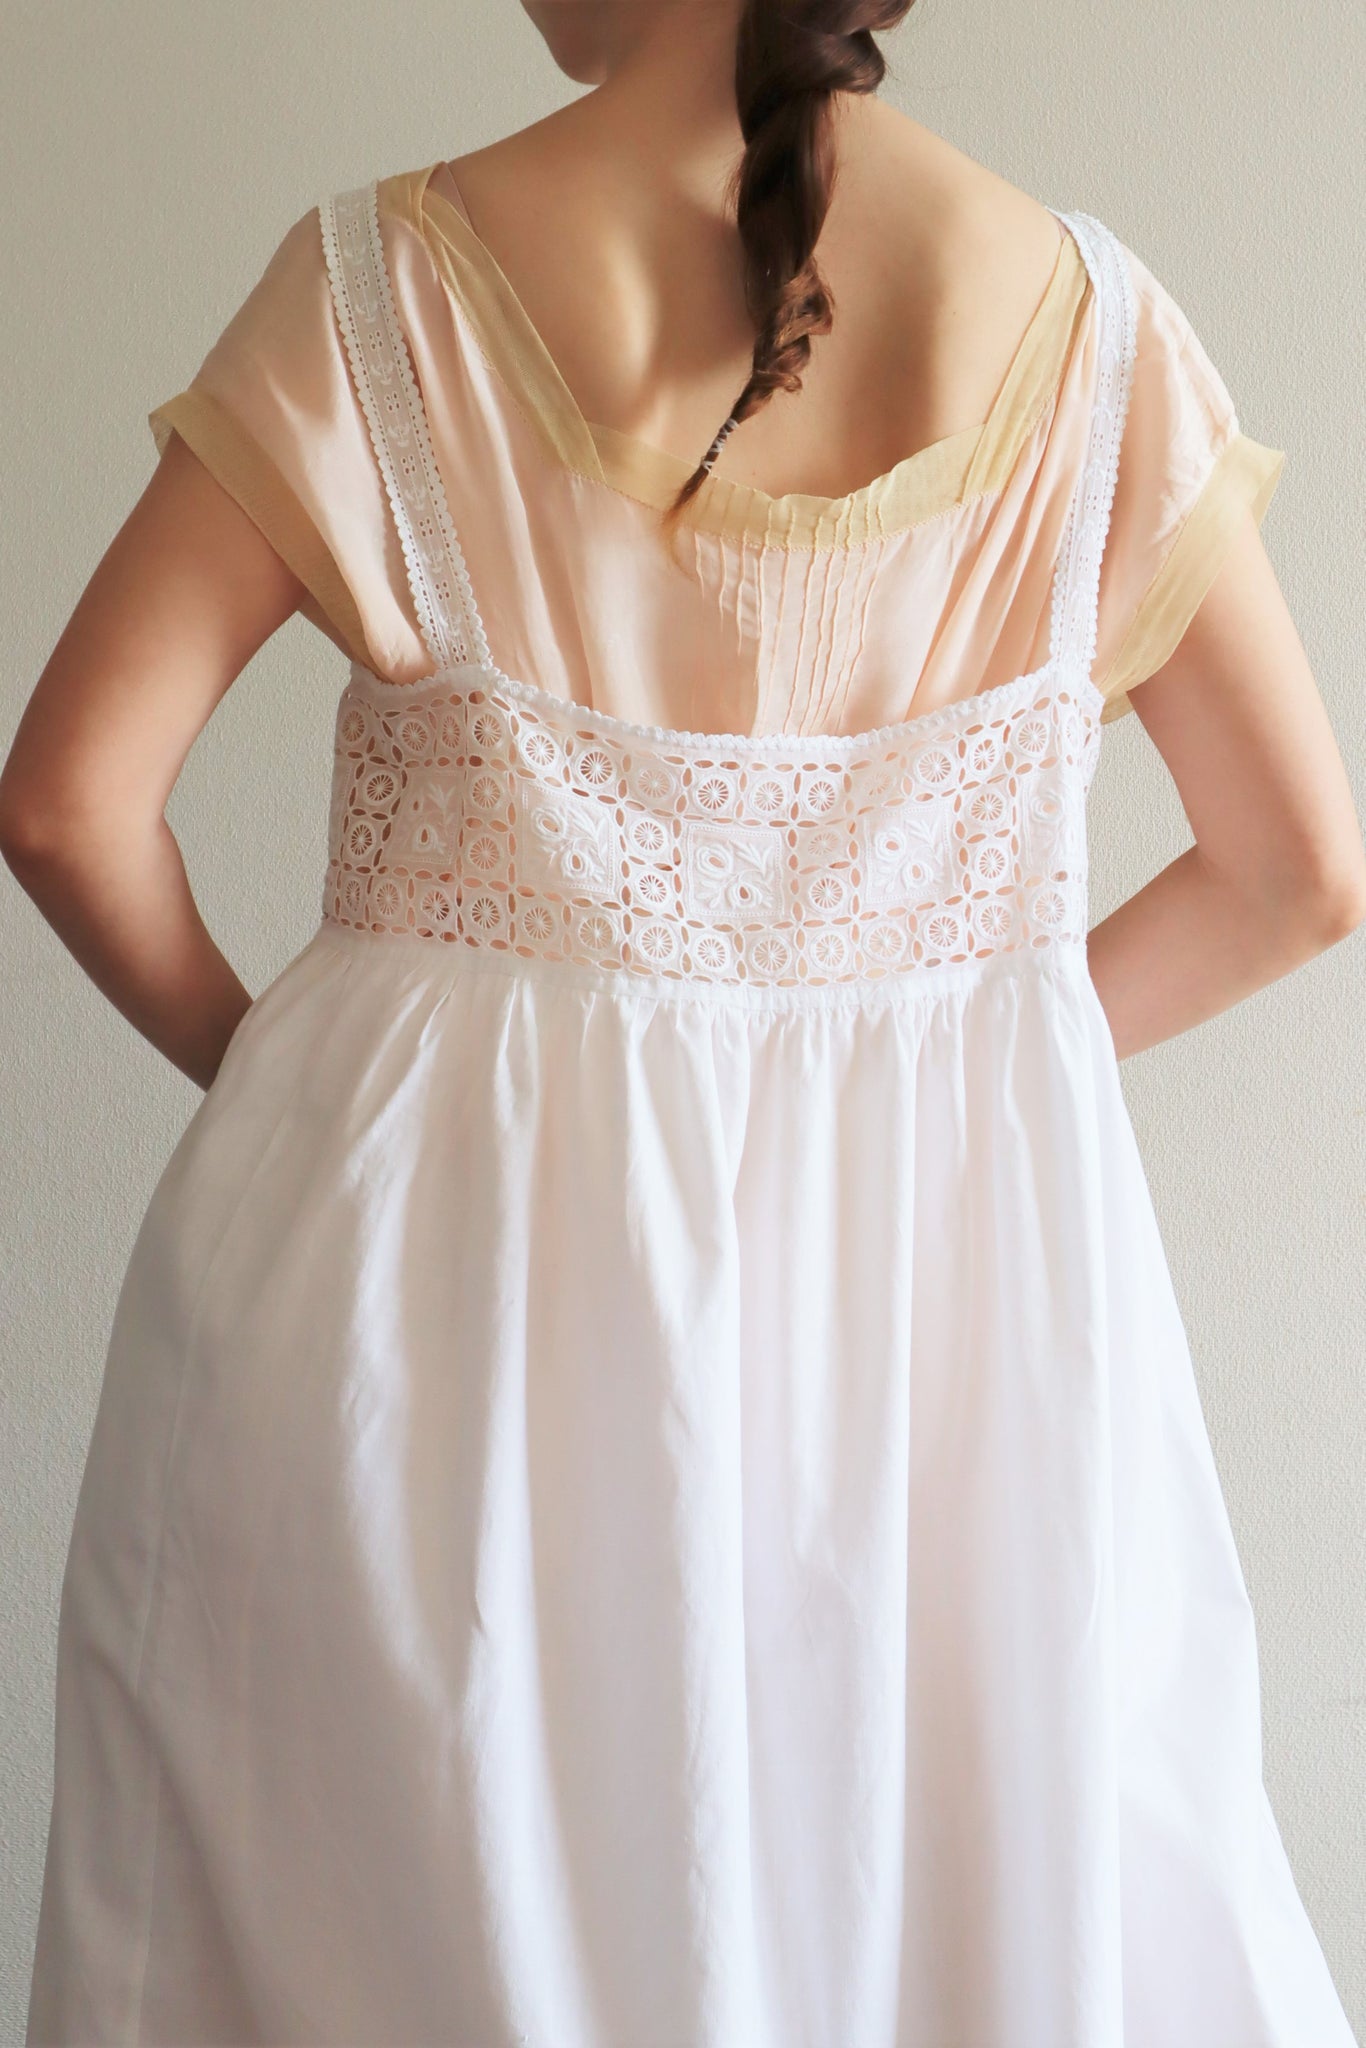 1900s Hand-Embroidered Botanical Lace White Cotton Camisole Dress